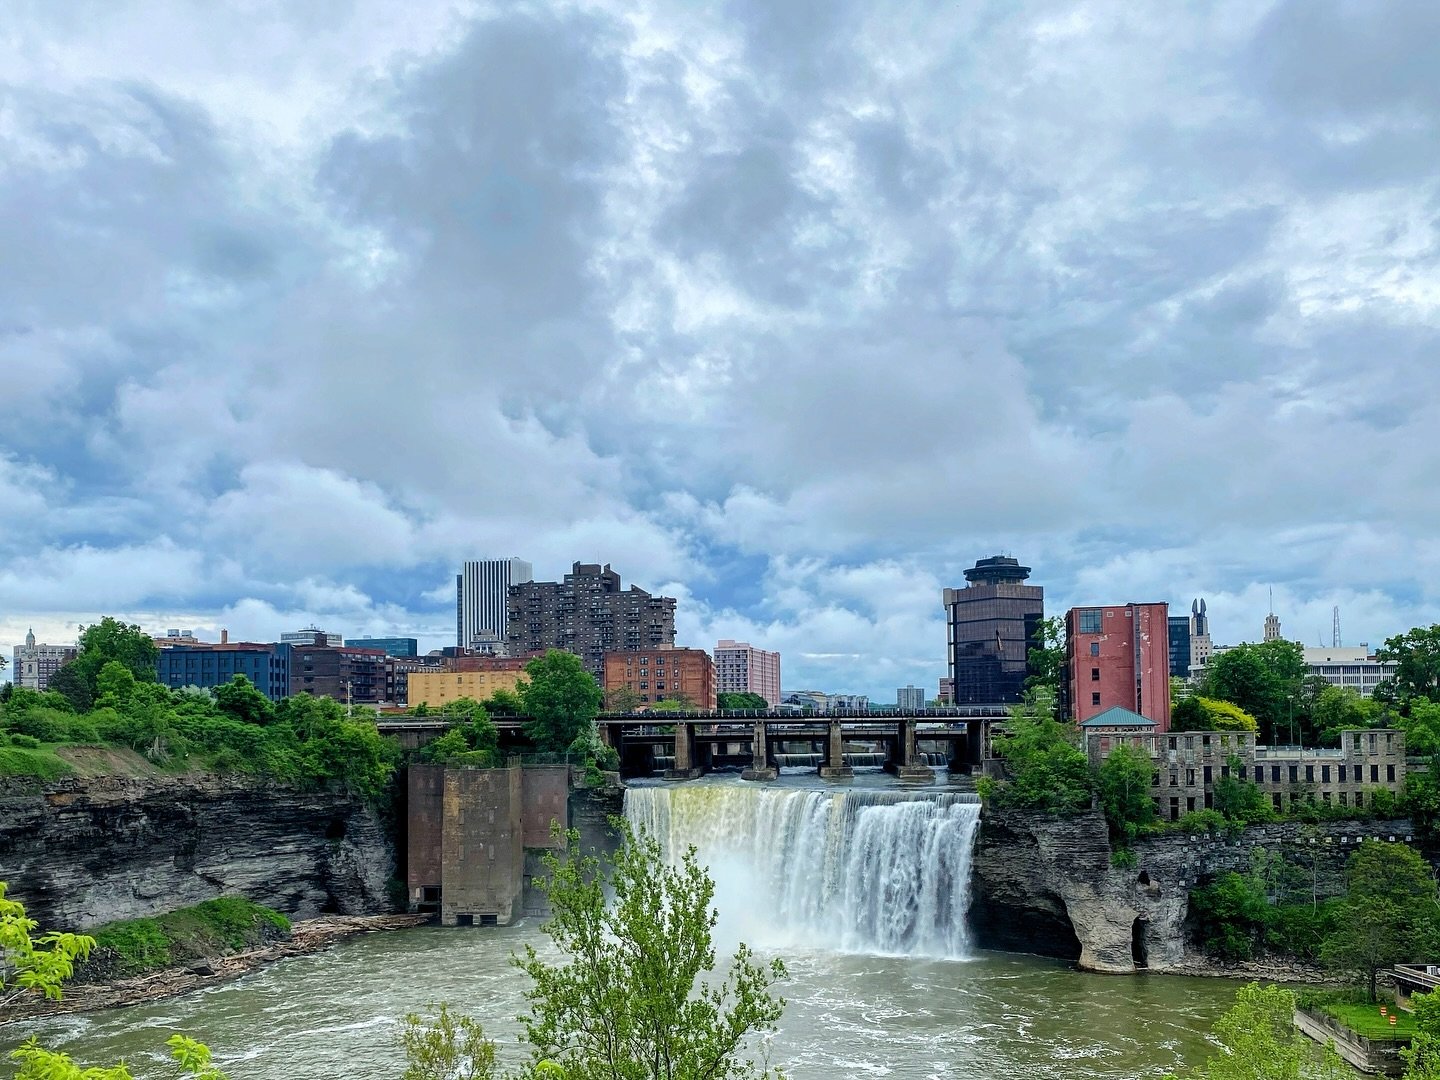 Did you know there&rsquo;s a waterfall right in the heart of Downtown Rochester? It&rsquo;s true! And according to our resident Rochesterian, it&rsquo;s one of the City&rsquo;s must-see historic spots. In advance of next week&rsquo;s statewide confer